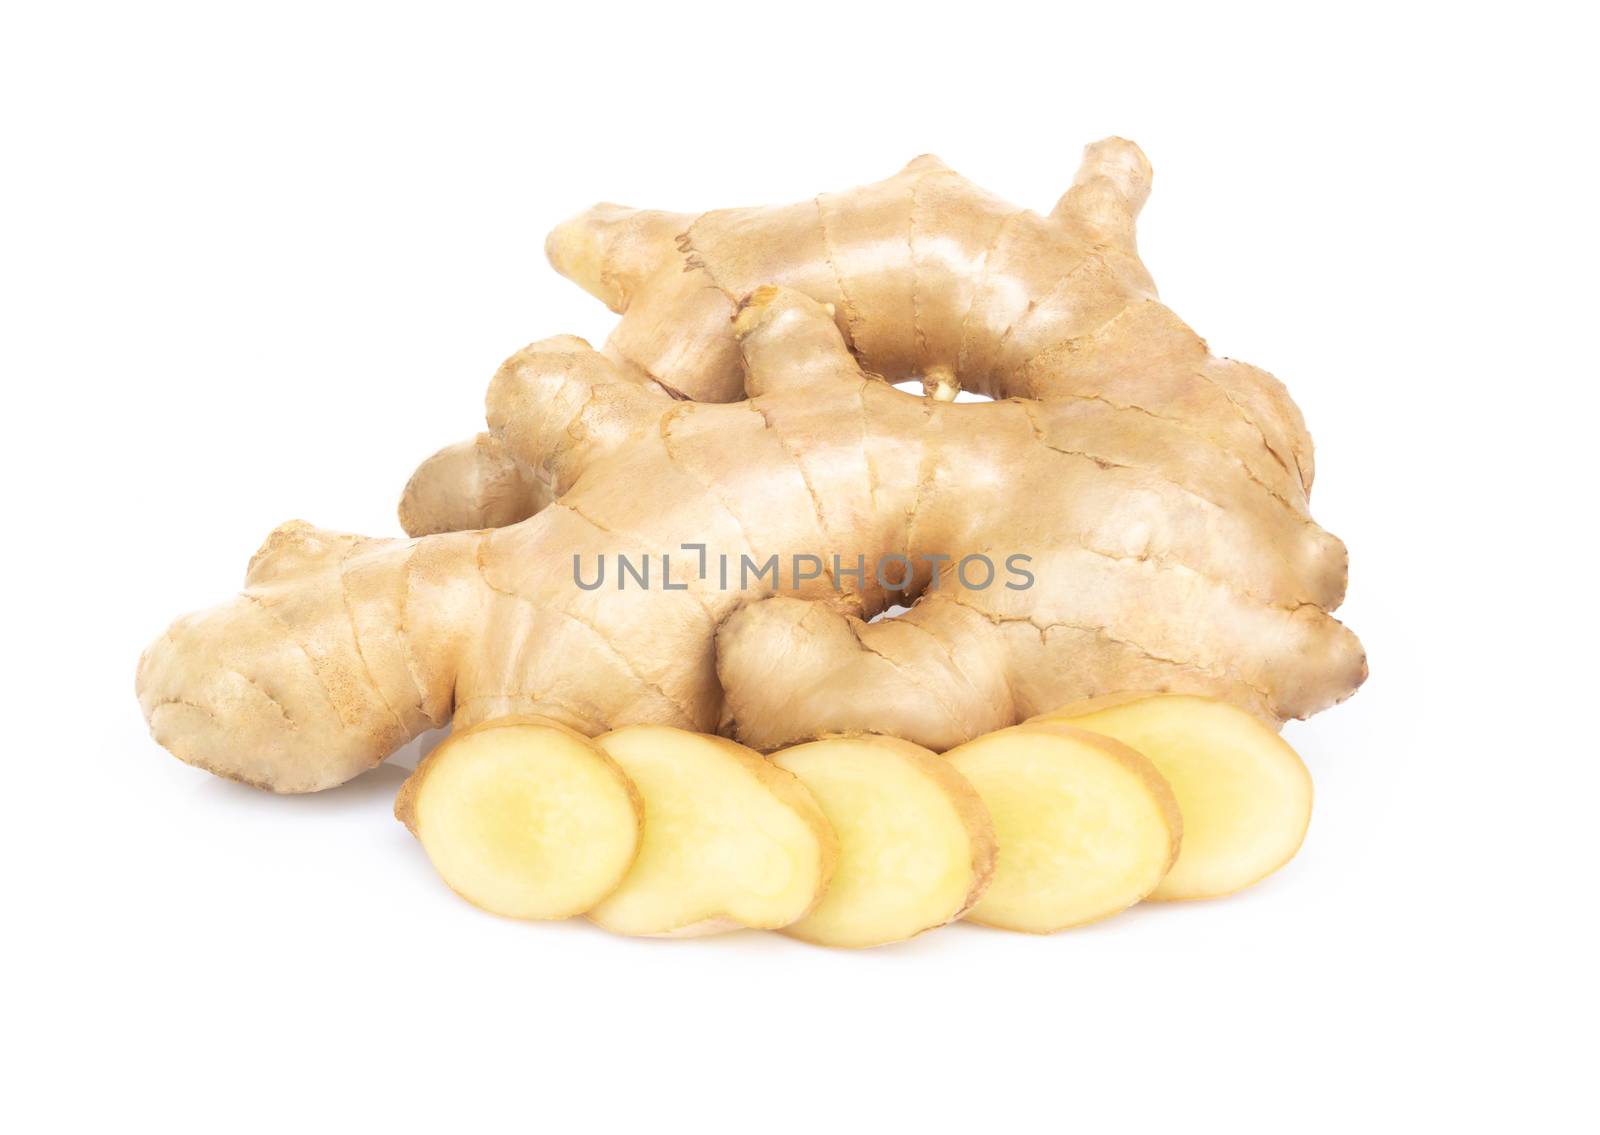 Fresh ginger root with sliced on white background for herb and m by pt.pongsak@gmail.com